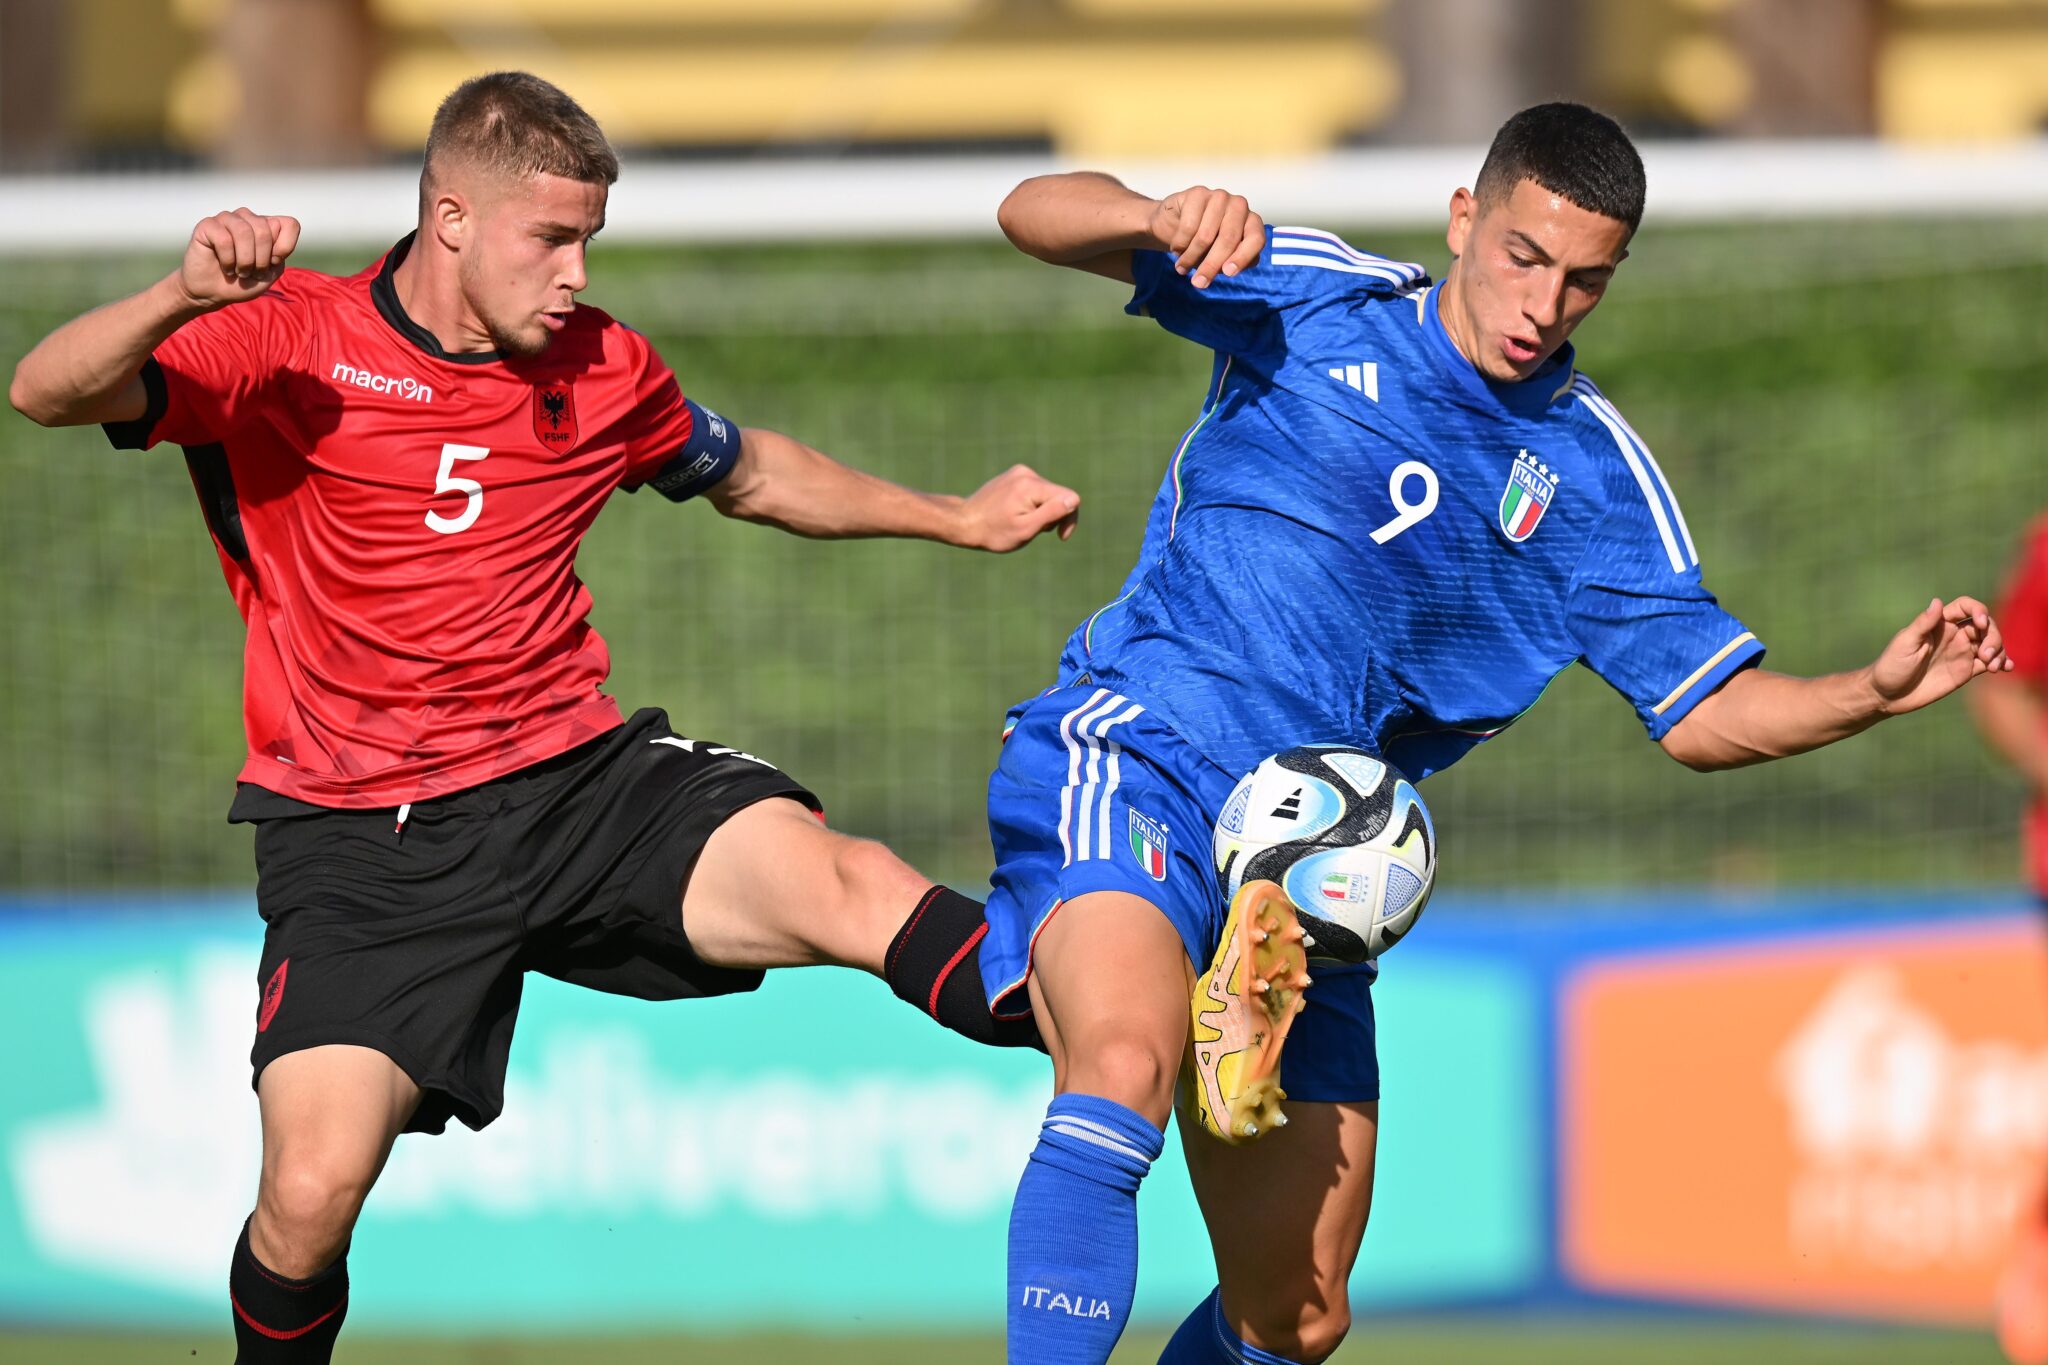 FLORENCE, ITALY - AUGUST 09: Arlind Kurti of Albania  competes for the ball with Alessandro Bolzan of Italy U19 during the match between Italy U19 and Albania U19 at Centro Tecnico Federale di Coverciano on August 09, 2023 in Florence, Italy. (Photo by Alessandro Sabattini/Getty Images)